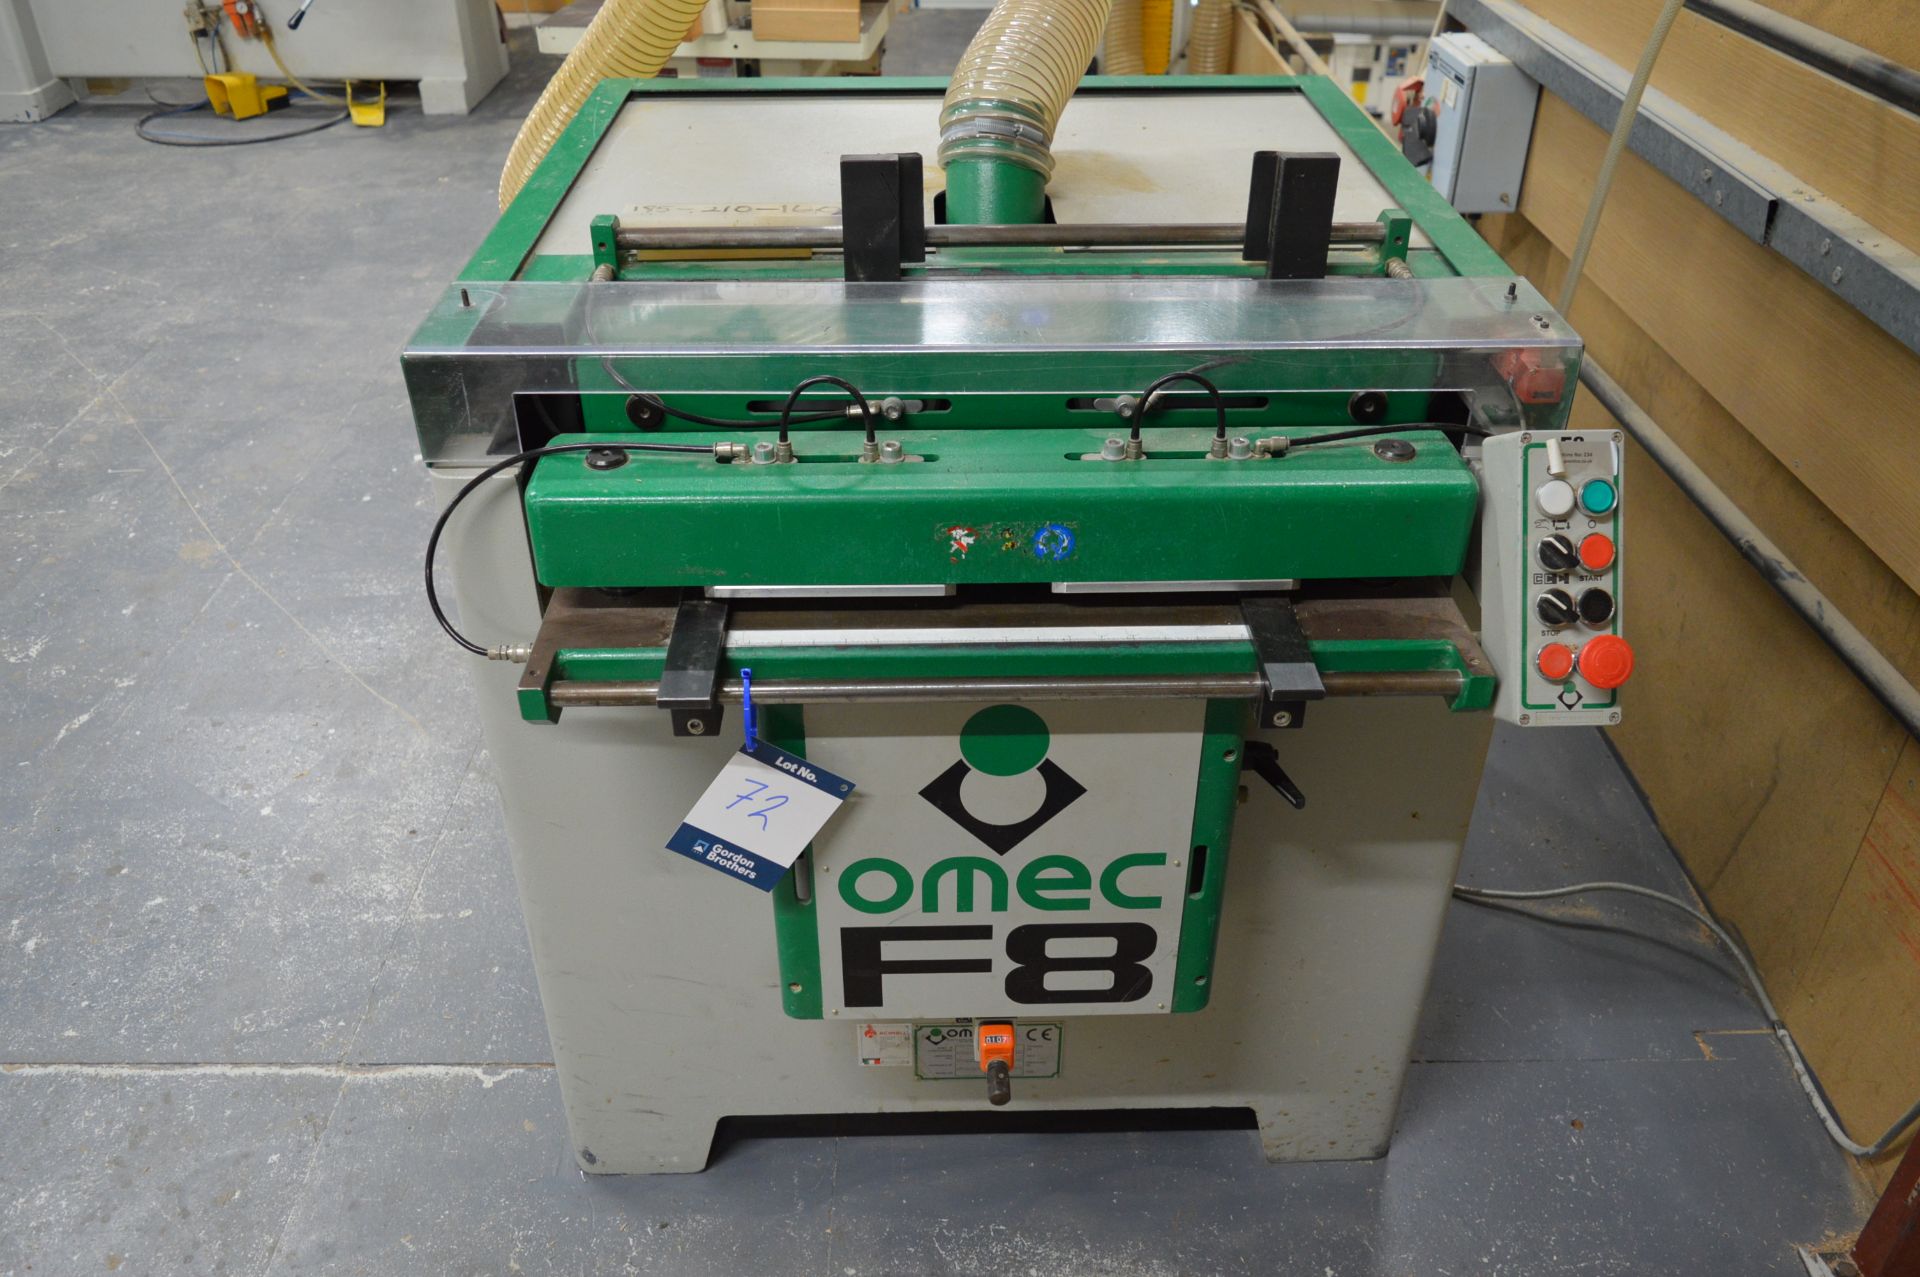 Omec F8 automatic spindle dovetailing machine, Serial No. 040189 (2004), (Ref: 234) (Location: Two